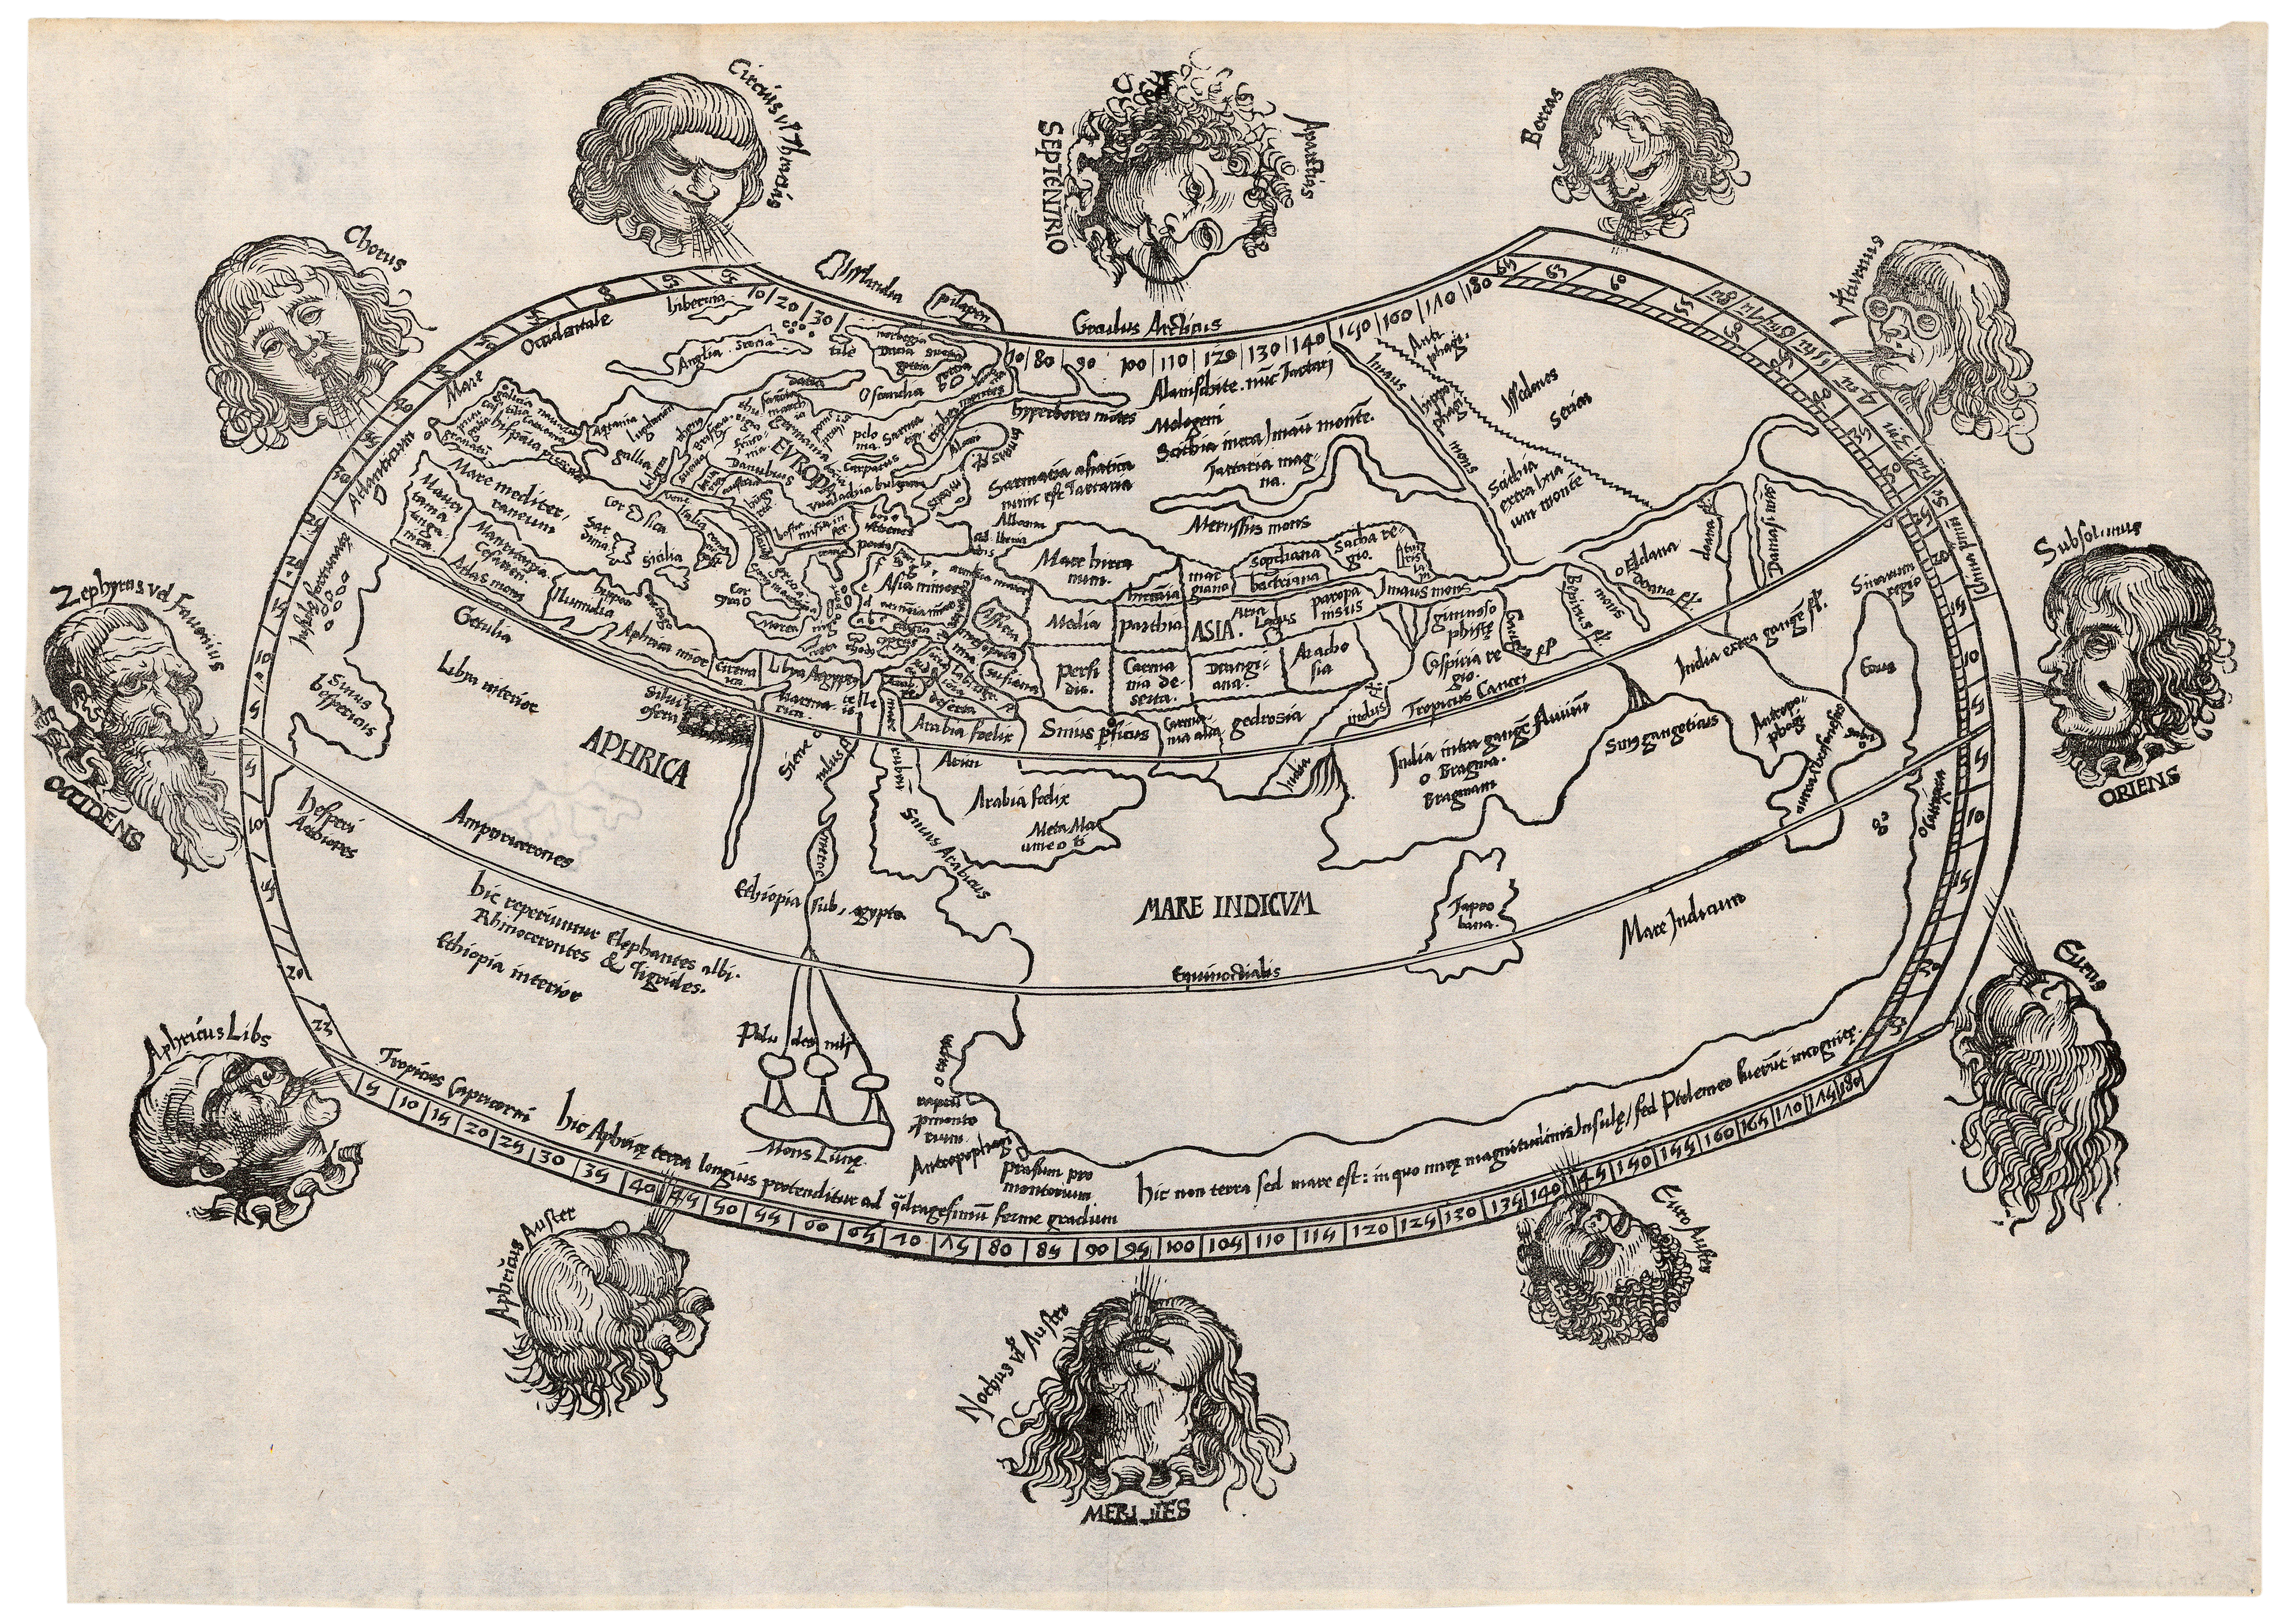 Reisch's Windhead Map showing lands unknown to Ptolemy, surrounded by 12 Windheads